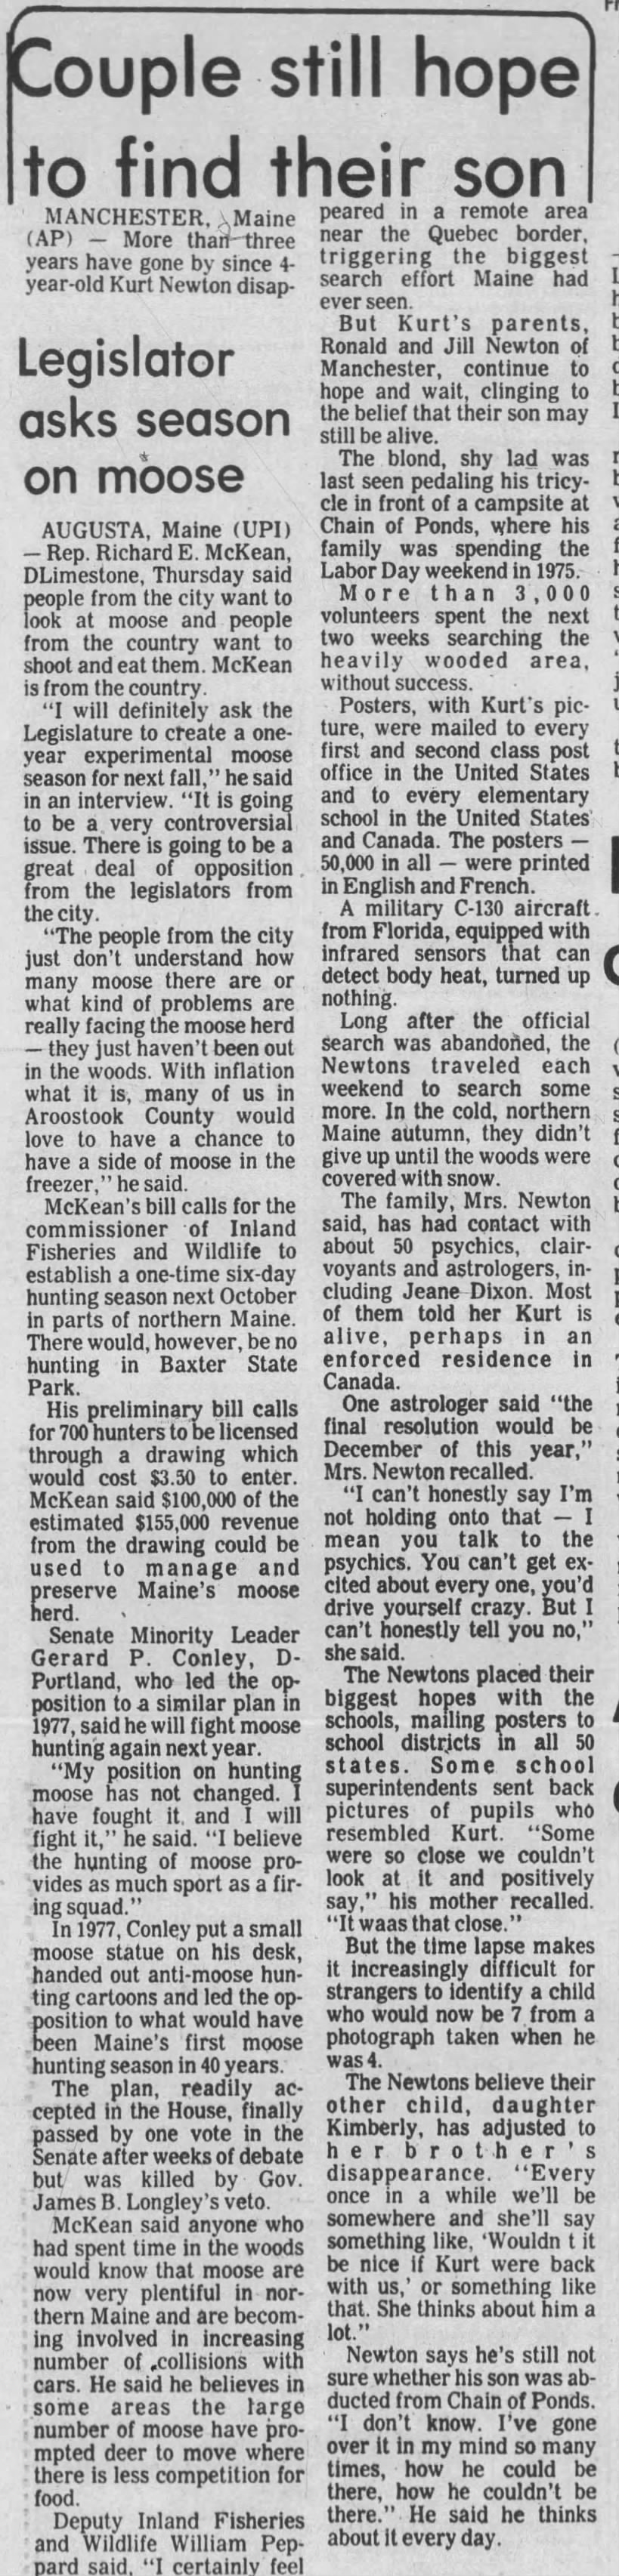 Couple still hope to find their son, Bangor Daily News, 09 Dec 1978